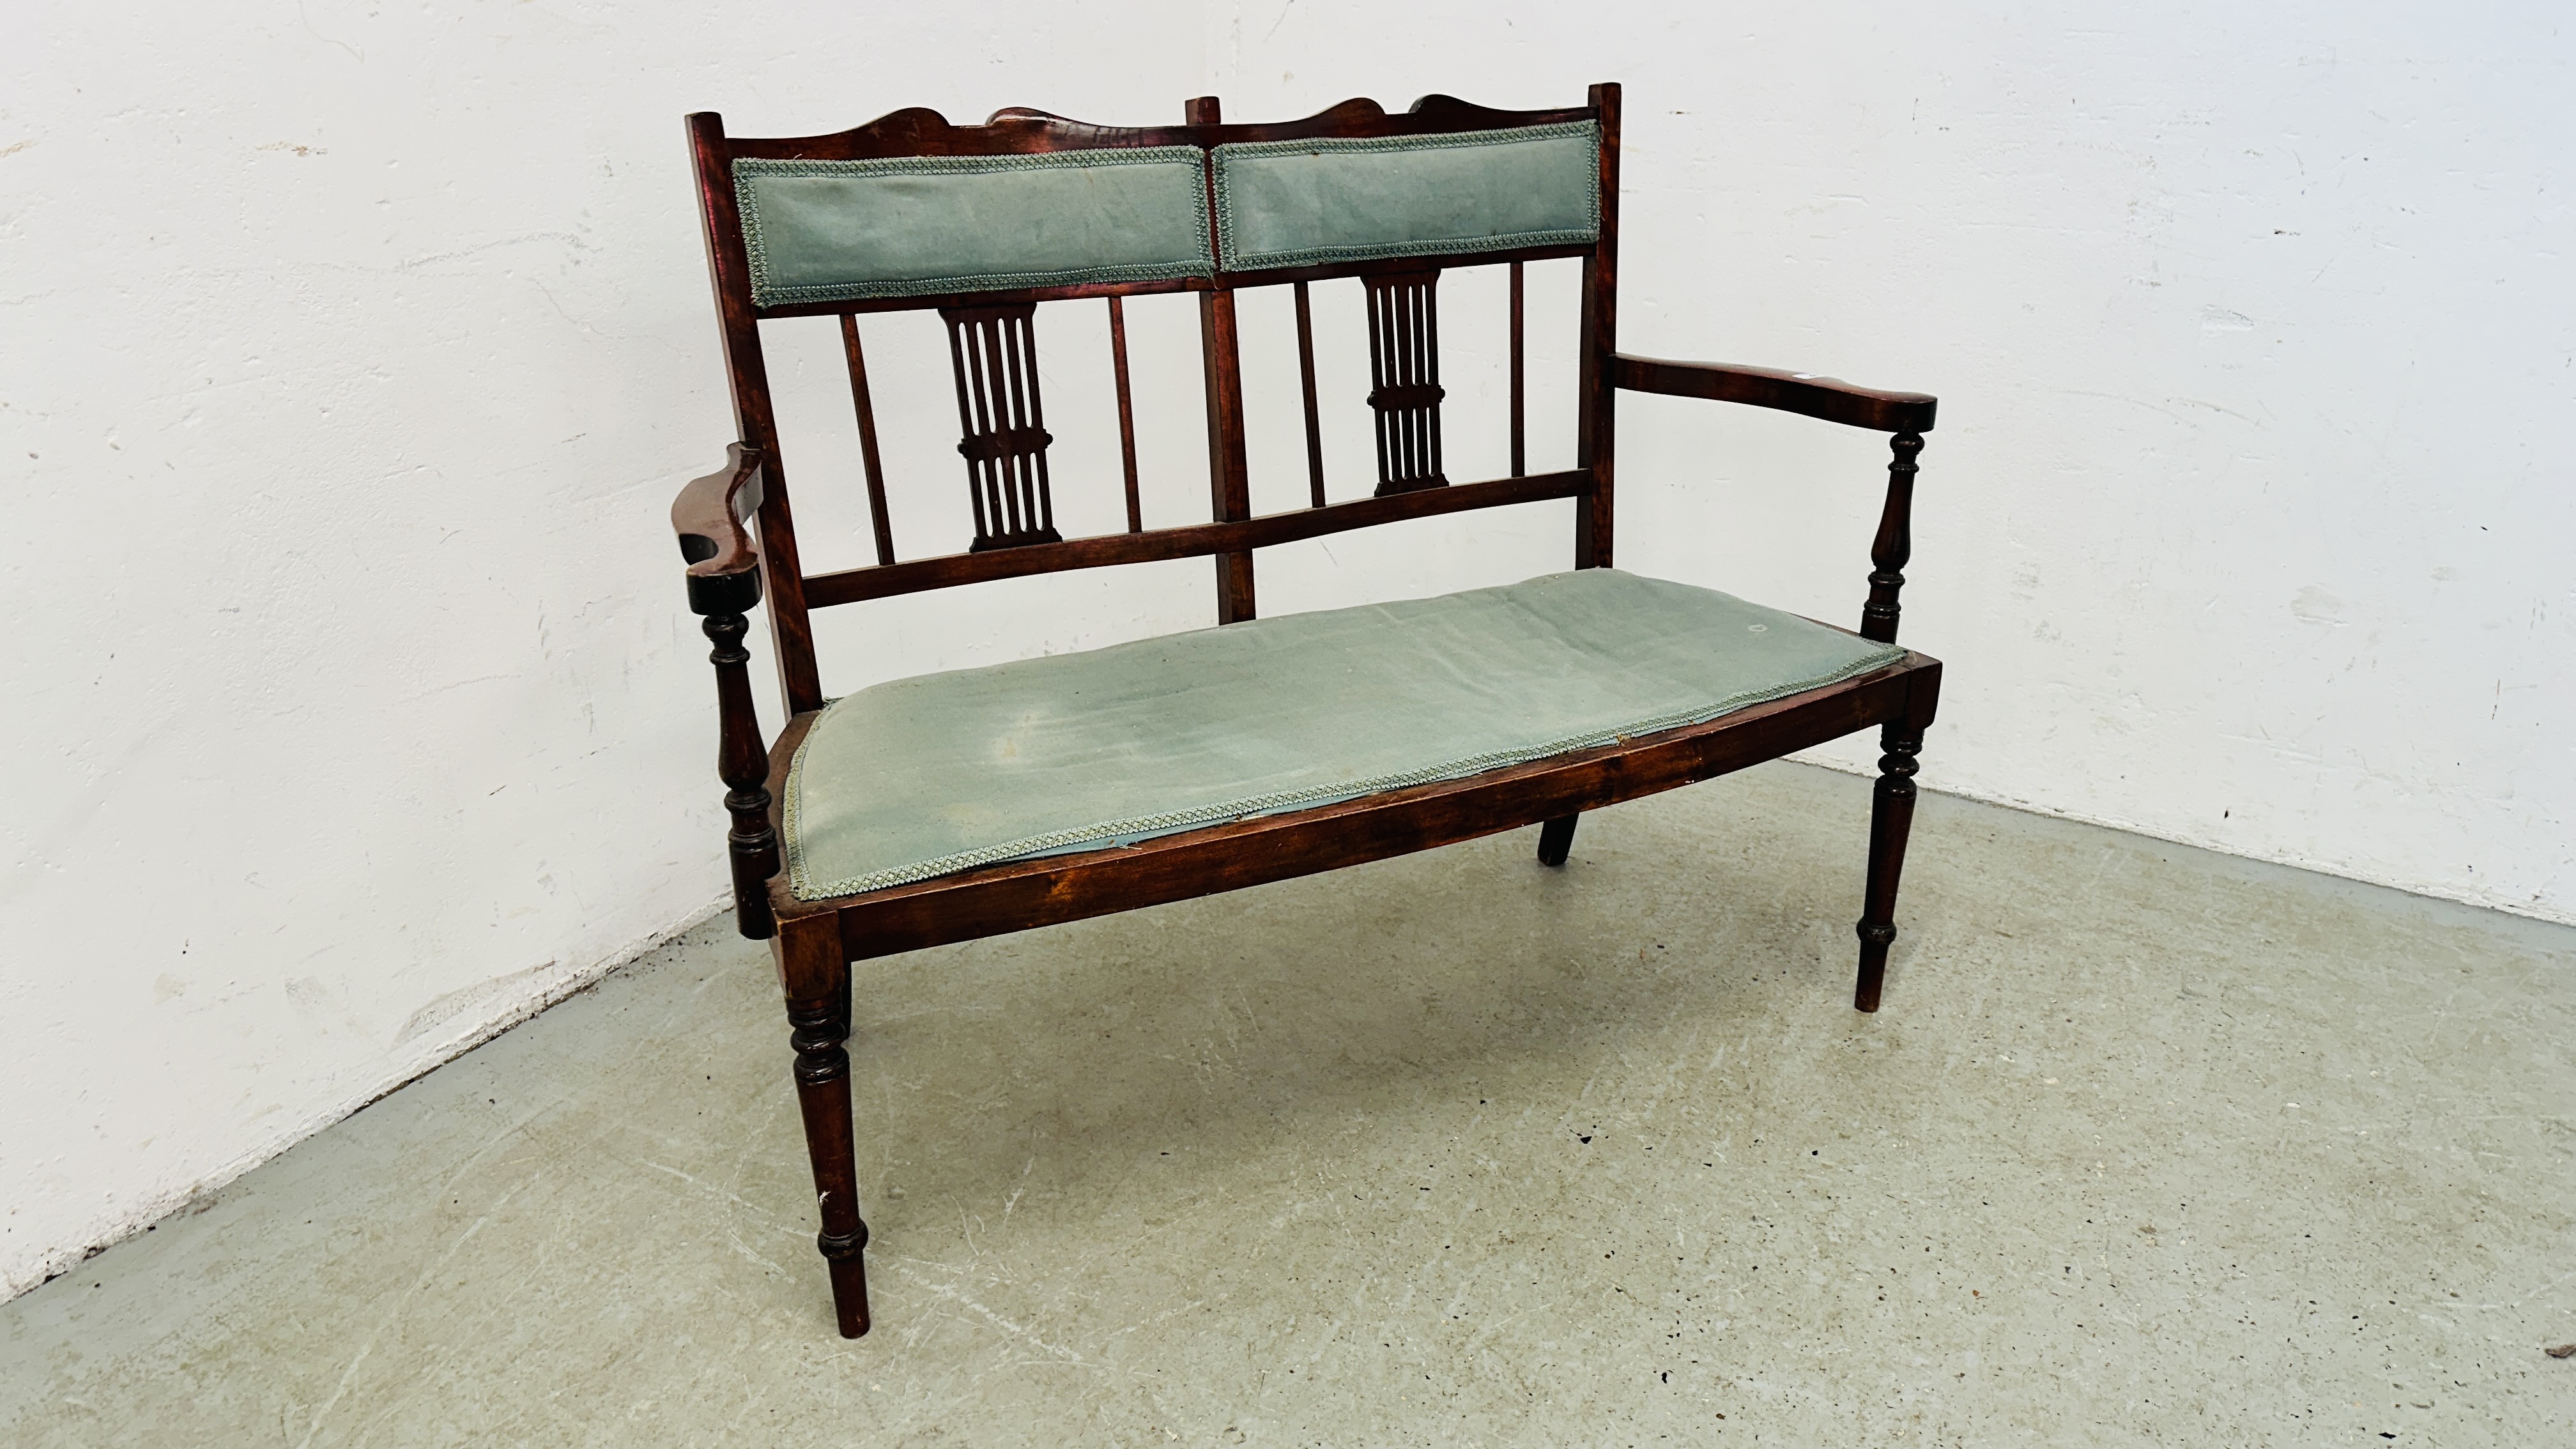 EDWARDIAN MAHOGANY 2 SEAT SOFA WITH FRETT WORK SUPPORT BACK AND GREEN UPHOLSTERY. - Image 2 of 11